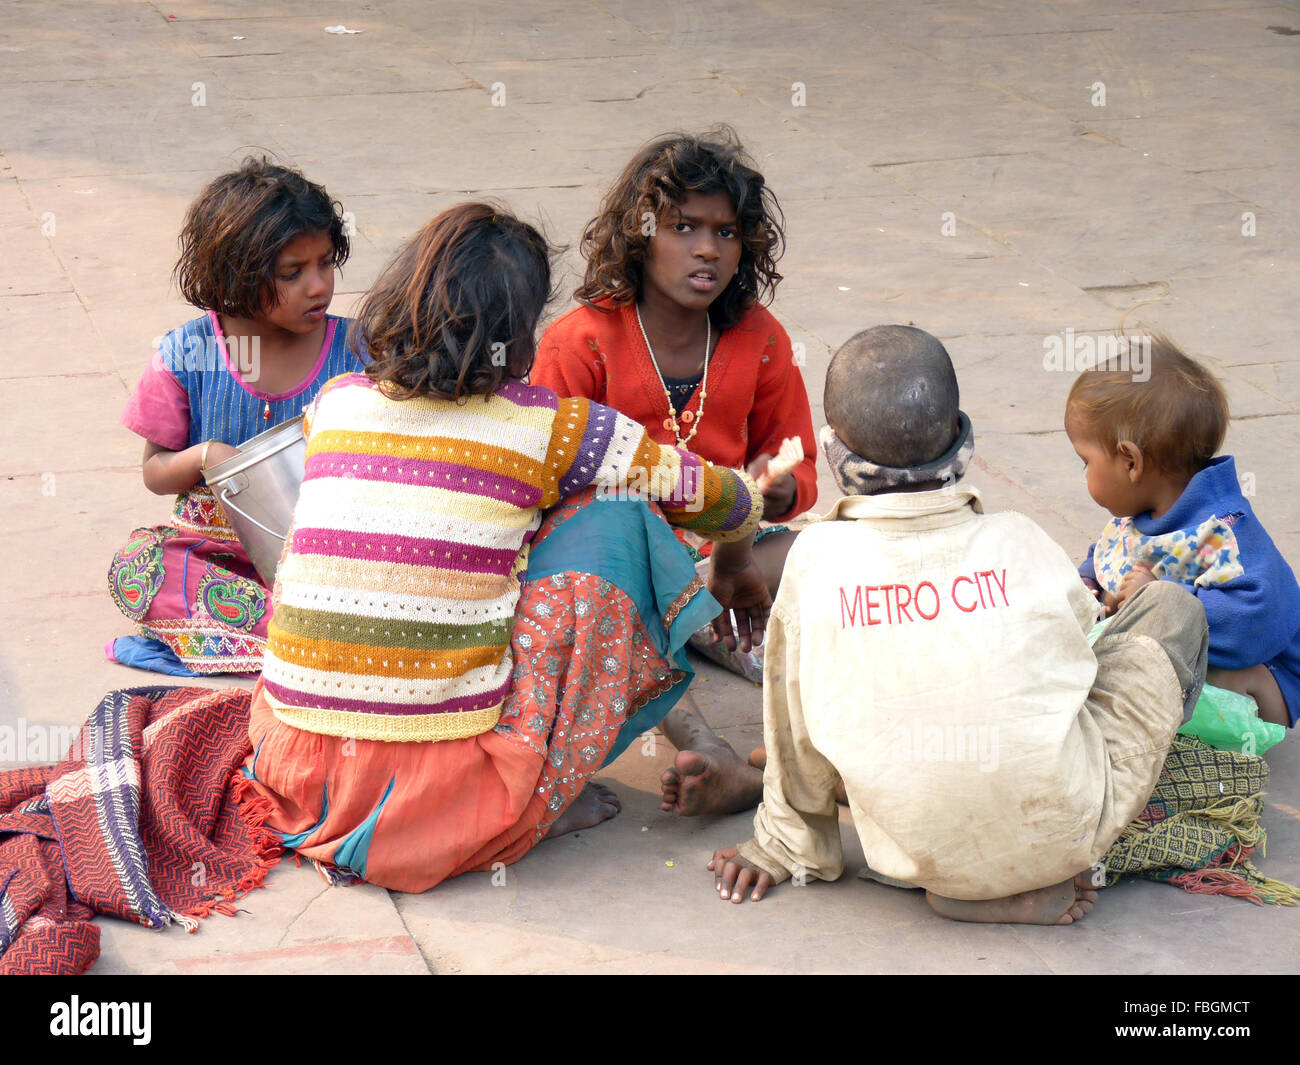 Group of Homeless Children Sitting on the Street in India Stock Photo